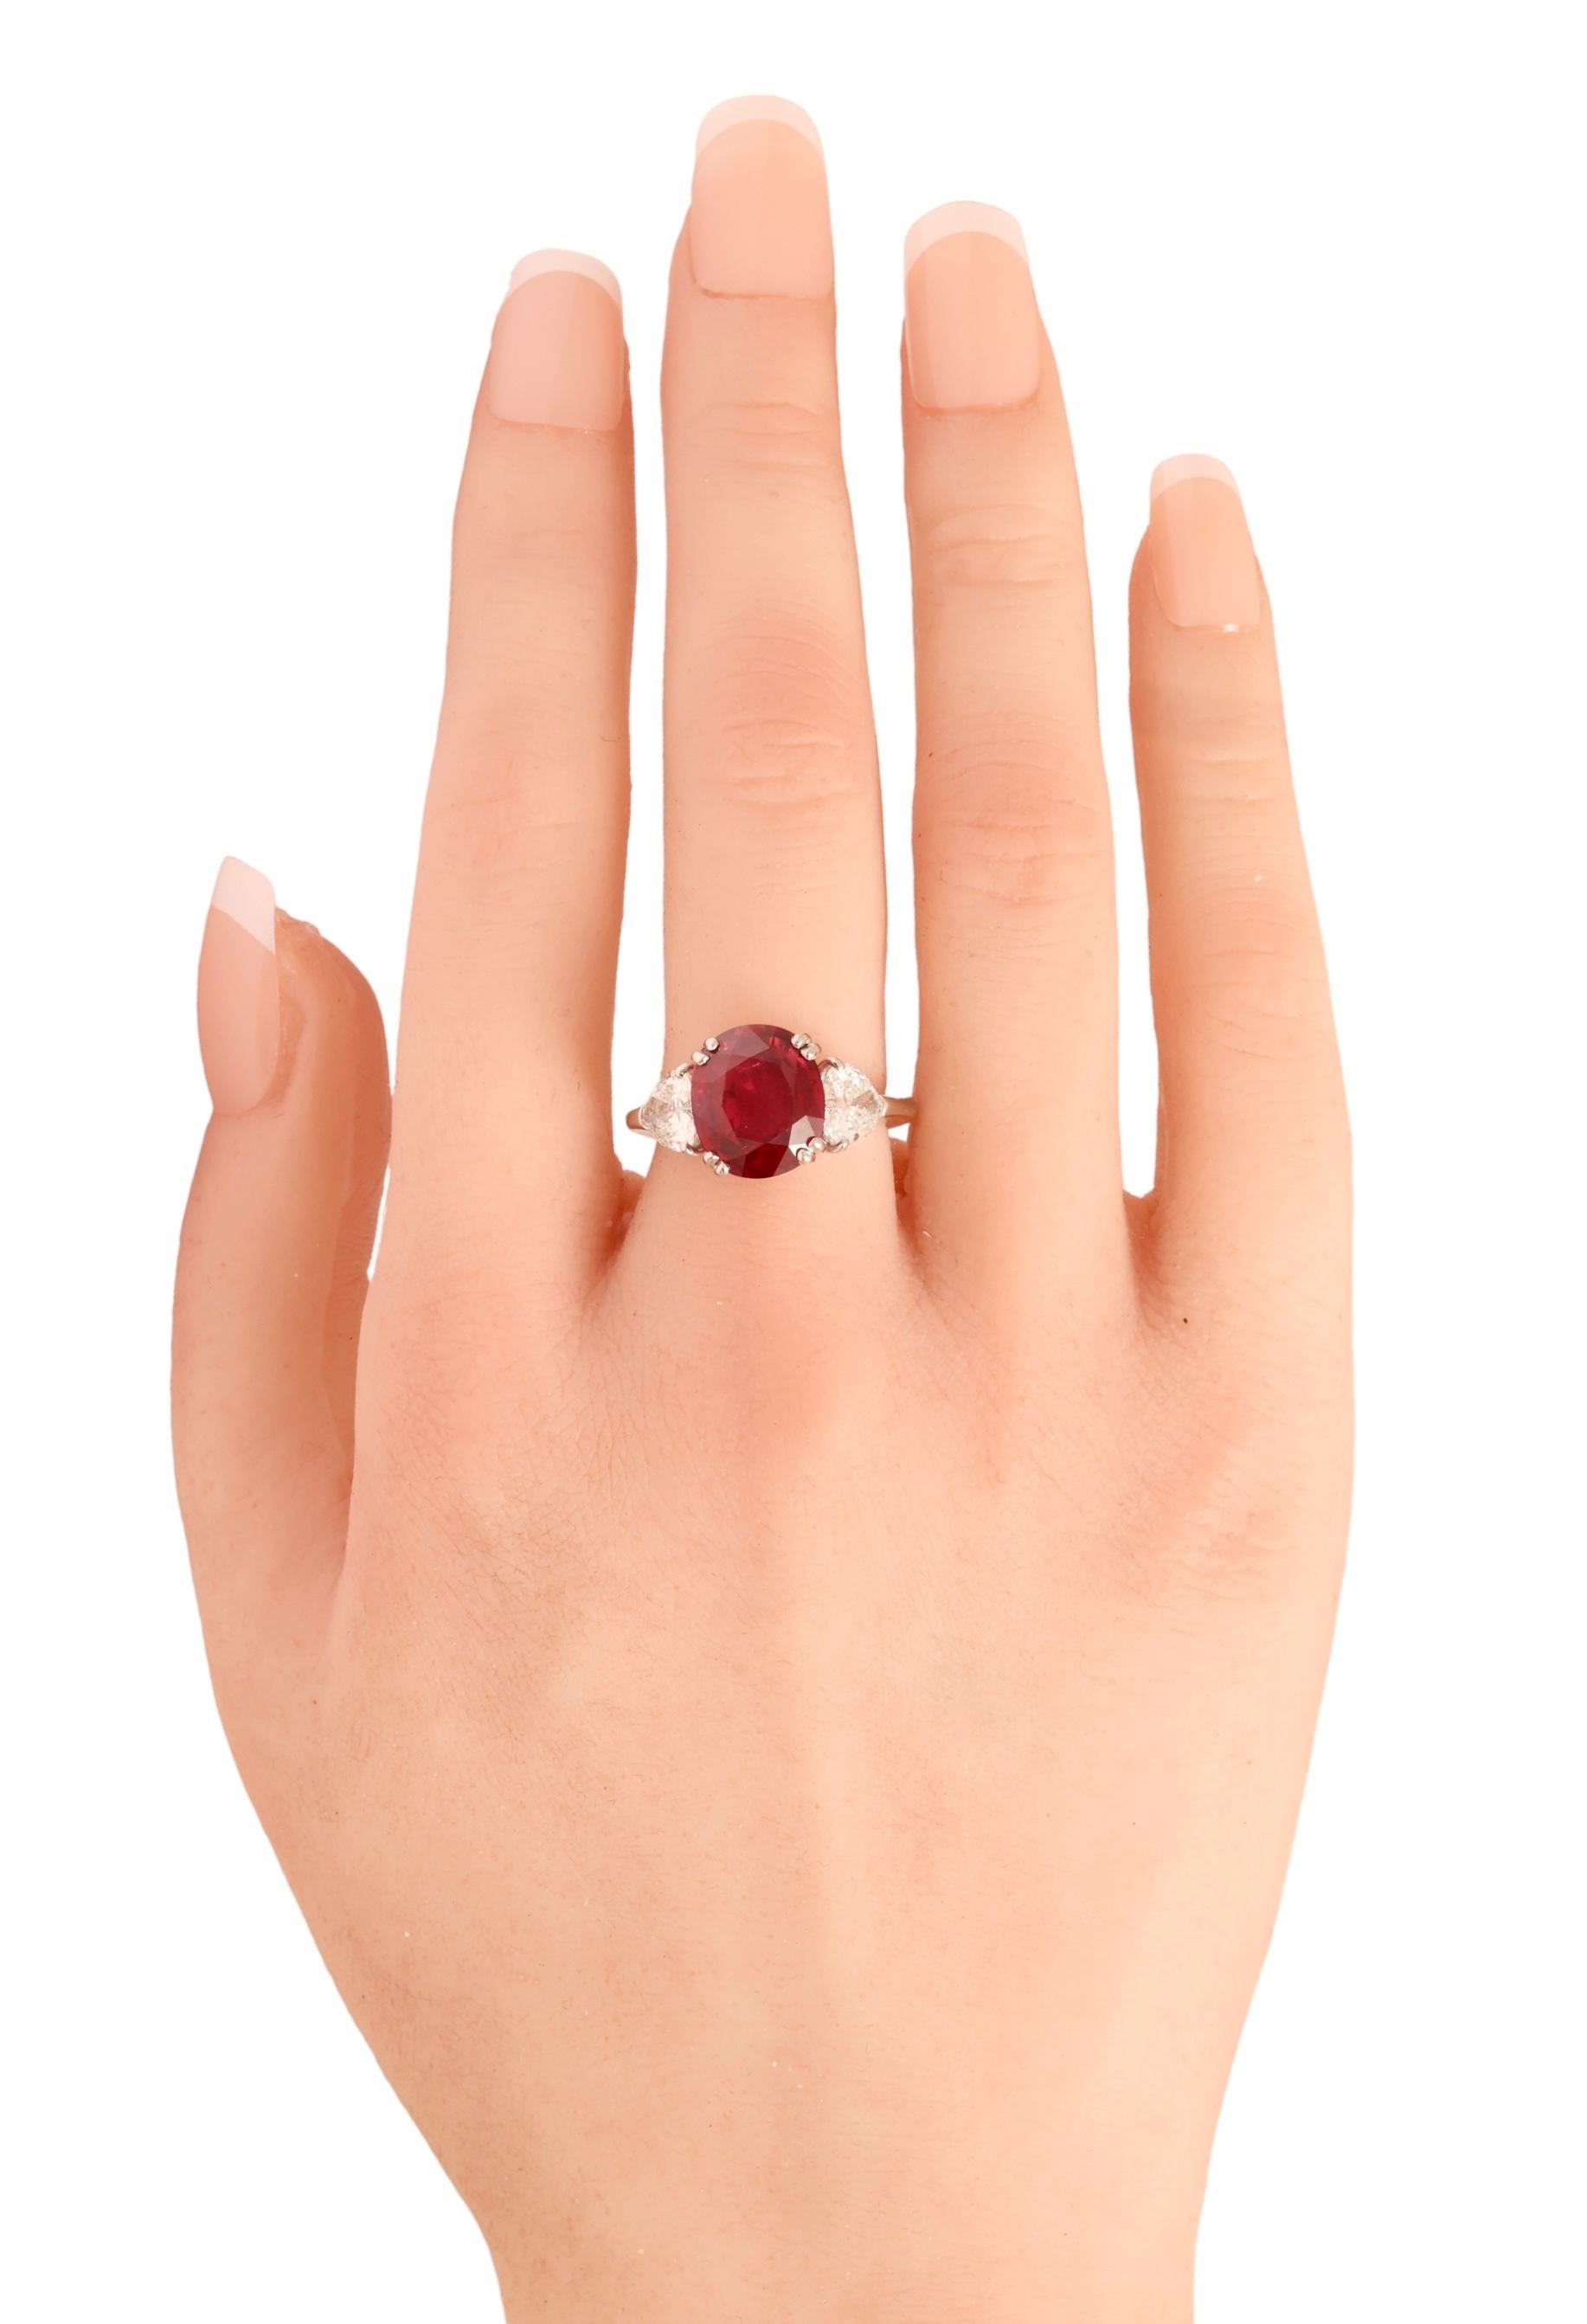 Women's or Men's Gorgeous Platinum Ring with Vivid Red 5.53 Ct Ruby & 1.5 Ct Heart Shape Diamond For Sale